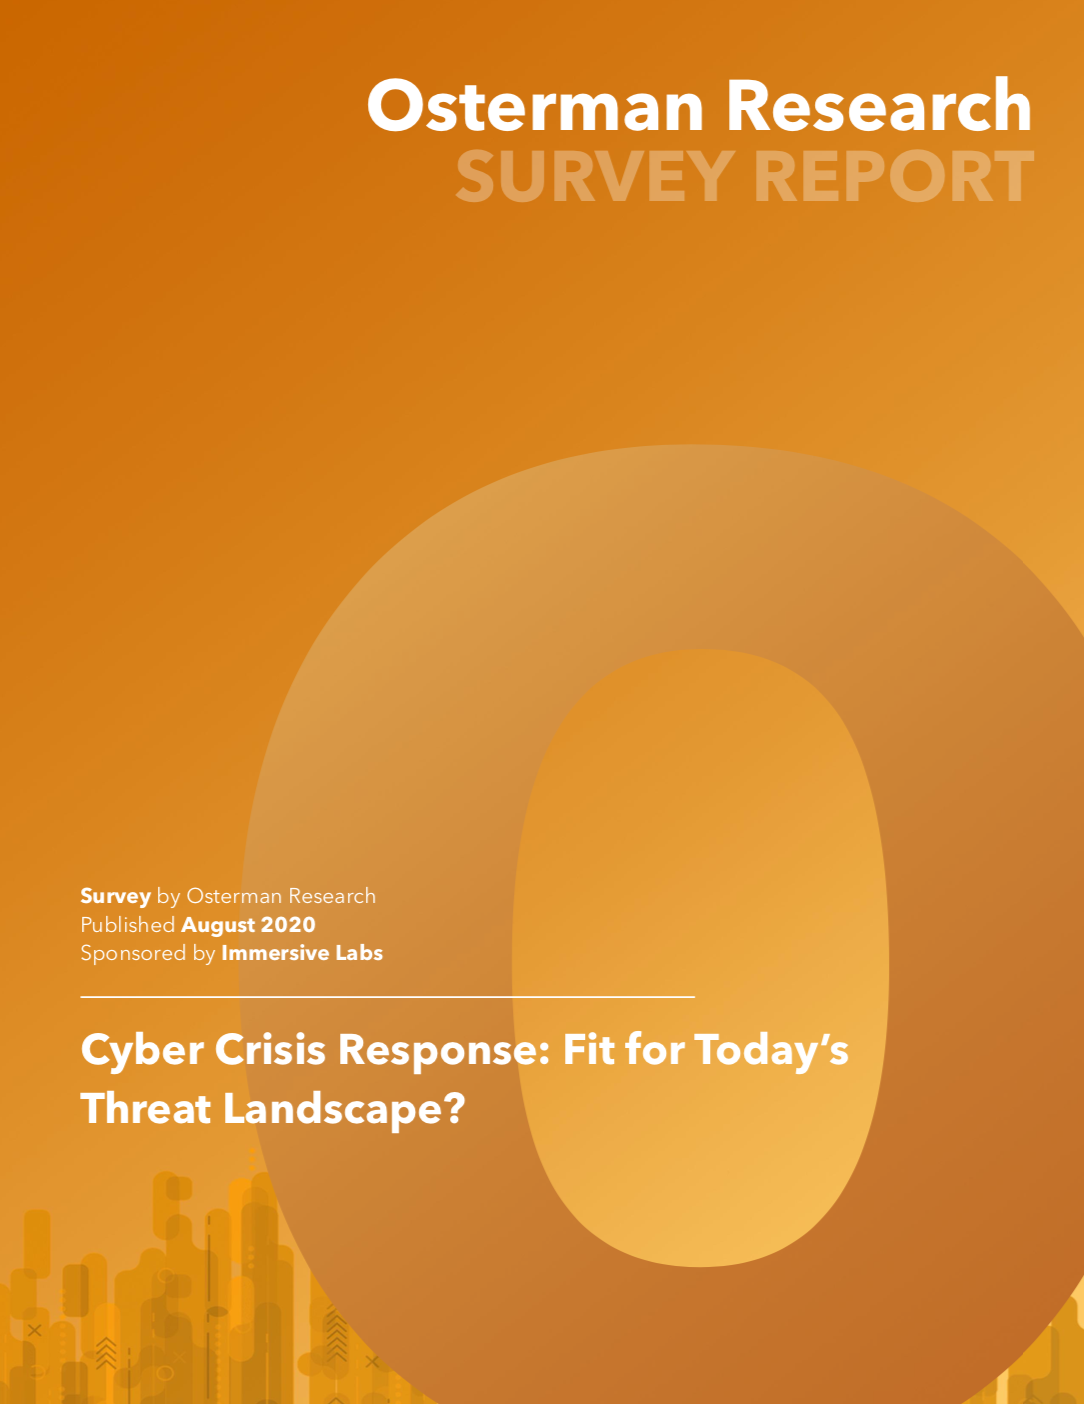 Cyber Crisis Response: Fit for today's threat landscape? Download the ebook here